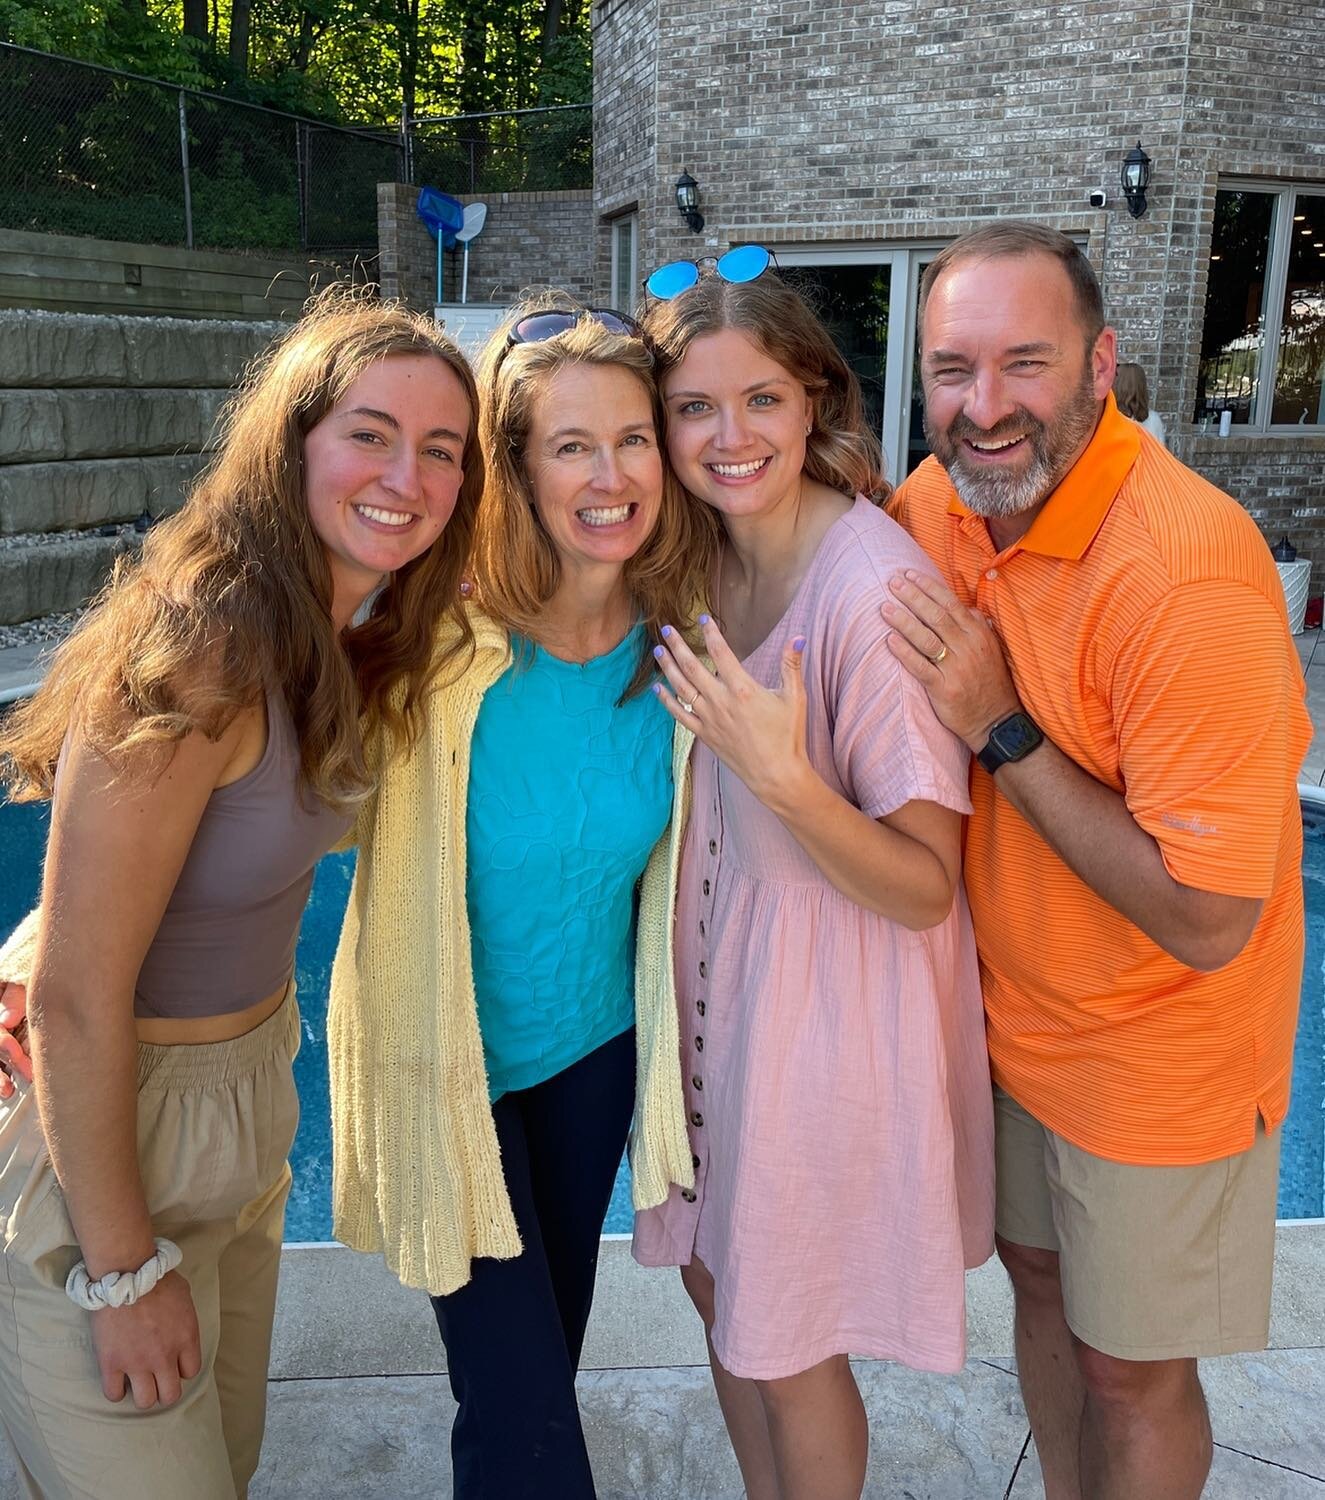 Last June, we celebrated Makayla&rsquo;s high school graduation and the engagement of Julia to her sweetheart of nine years. Our family (shown here), along with Julia&rsquo;s dad and bonus mom, Bonnie, surprised Julia and Ryan after their Lake Michig